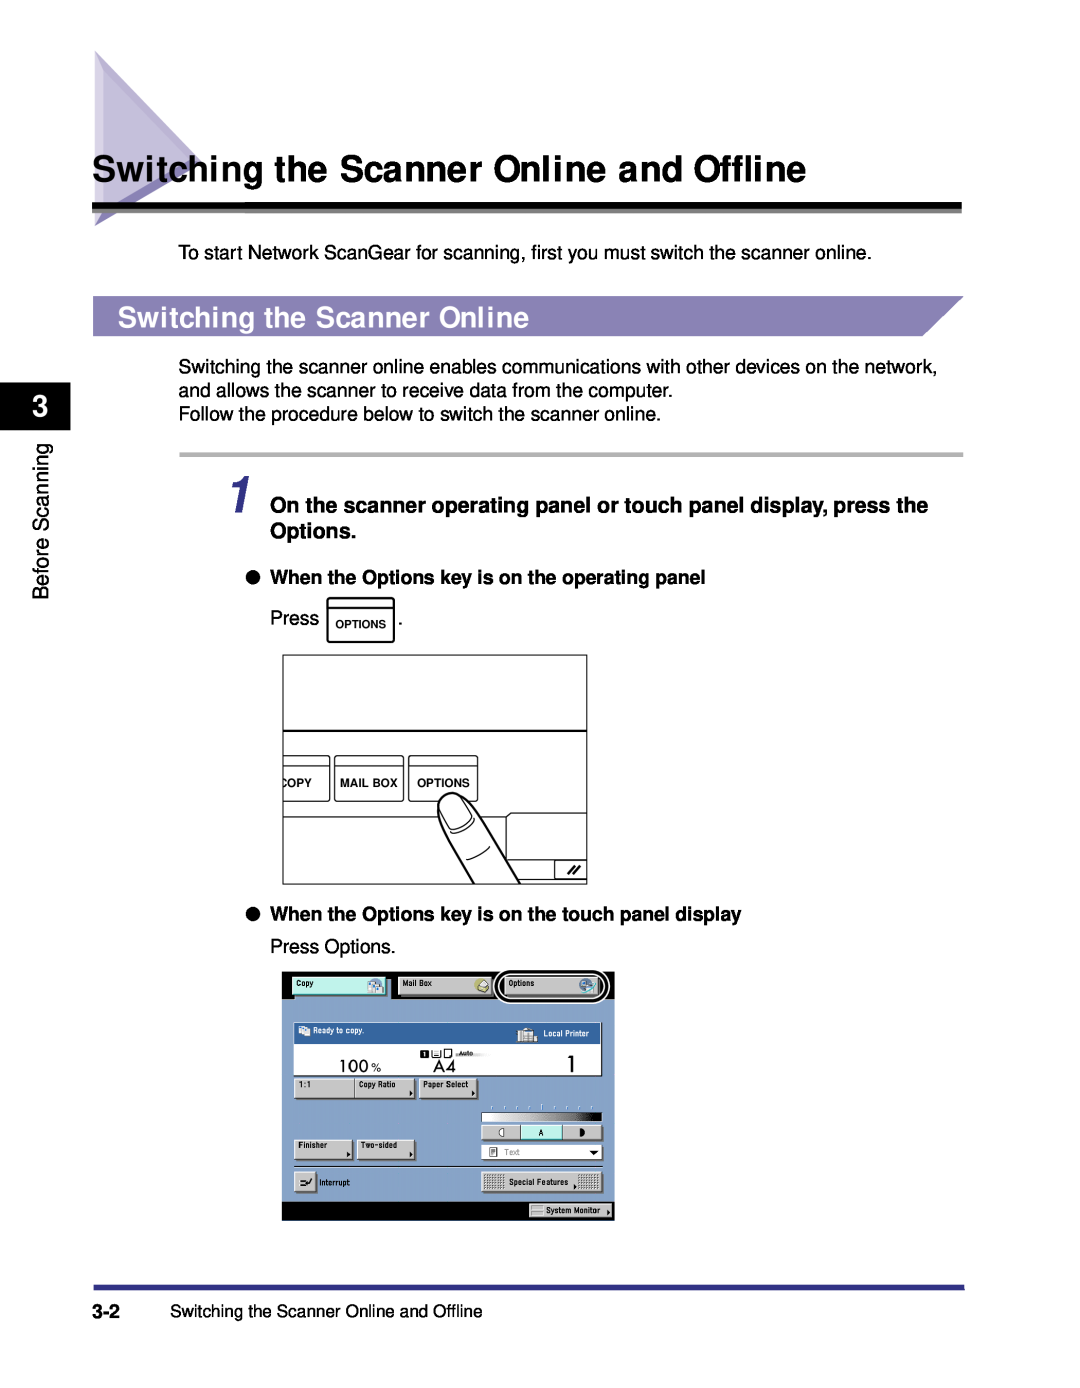 Canon iR Series Switching the Scanner Online and Ofﬂine, Before Scanning, When the Options key is on the operating panel 